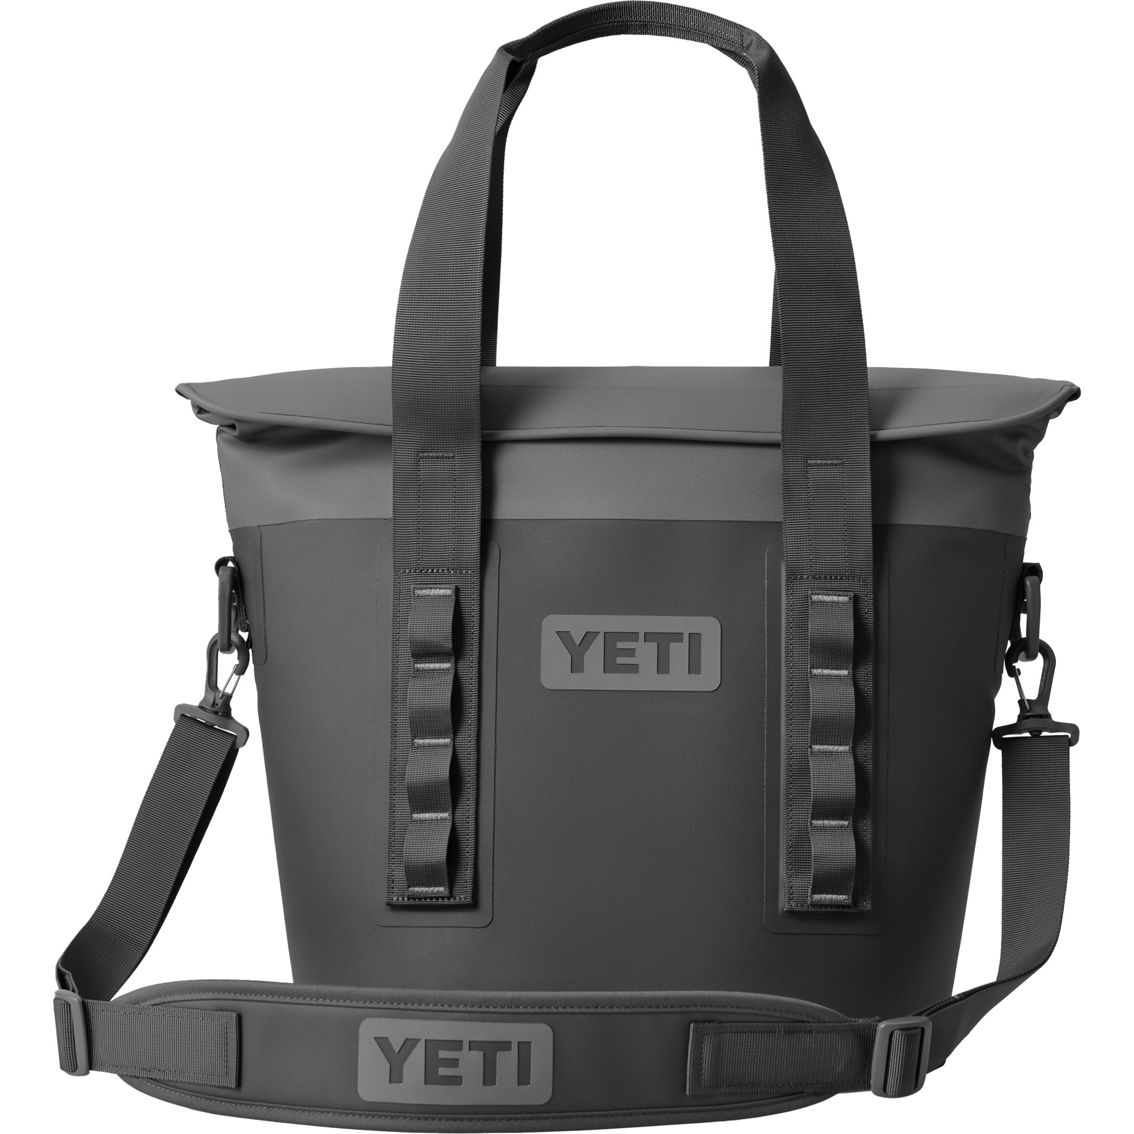 Yeti Hopper M15 Tote, Coolers, Sports & Outdoors